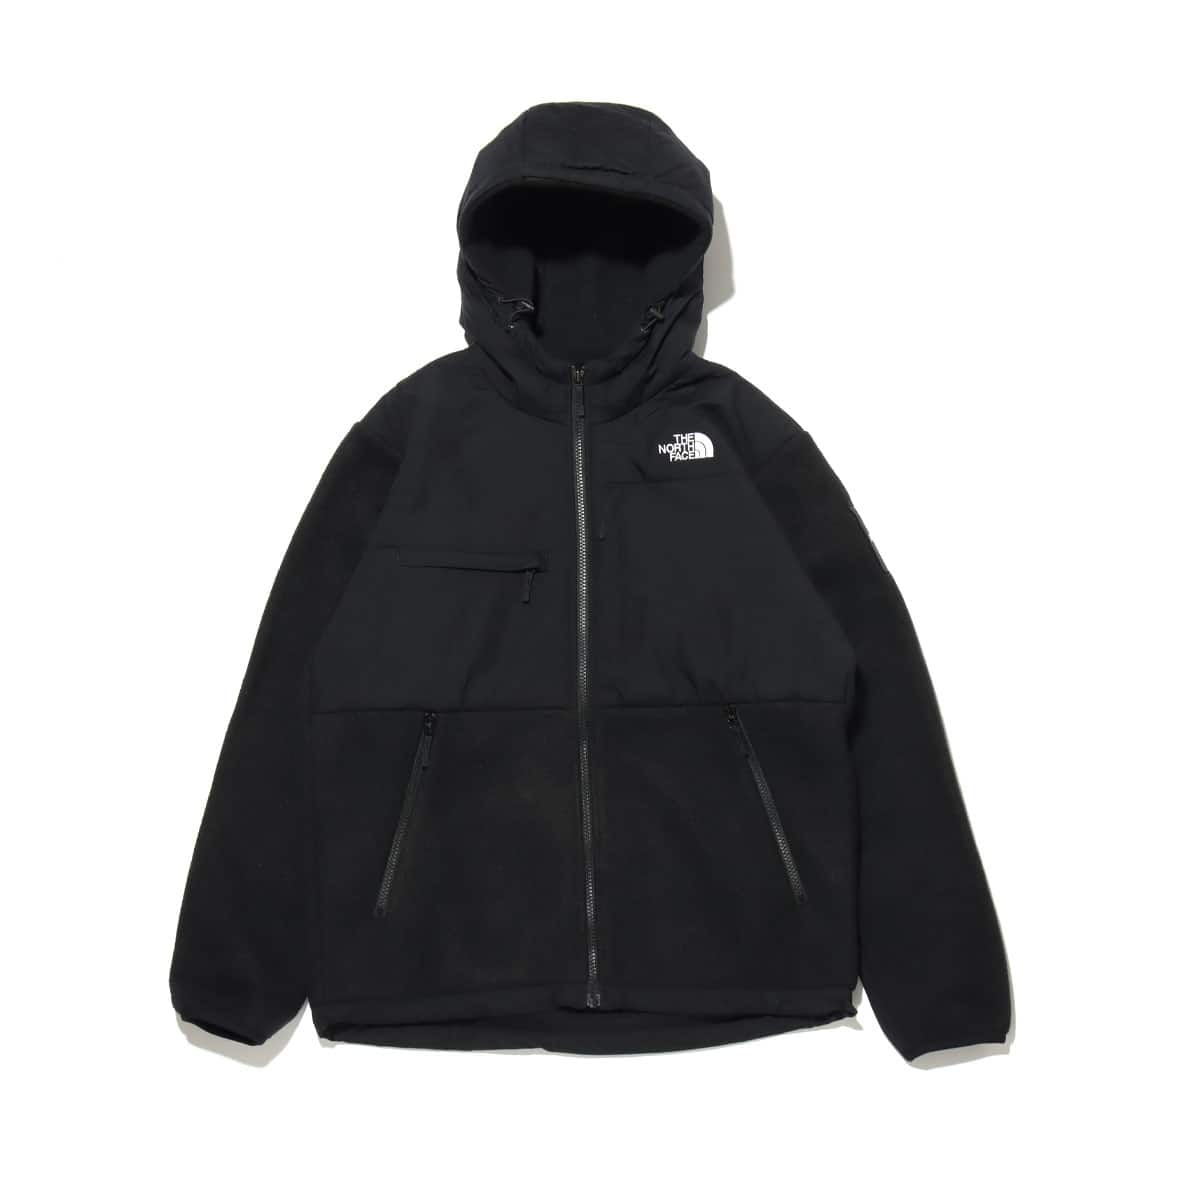 THE NORTH FACE DENALI HOODIE BLACK 22FW-I